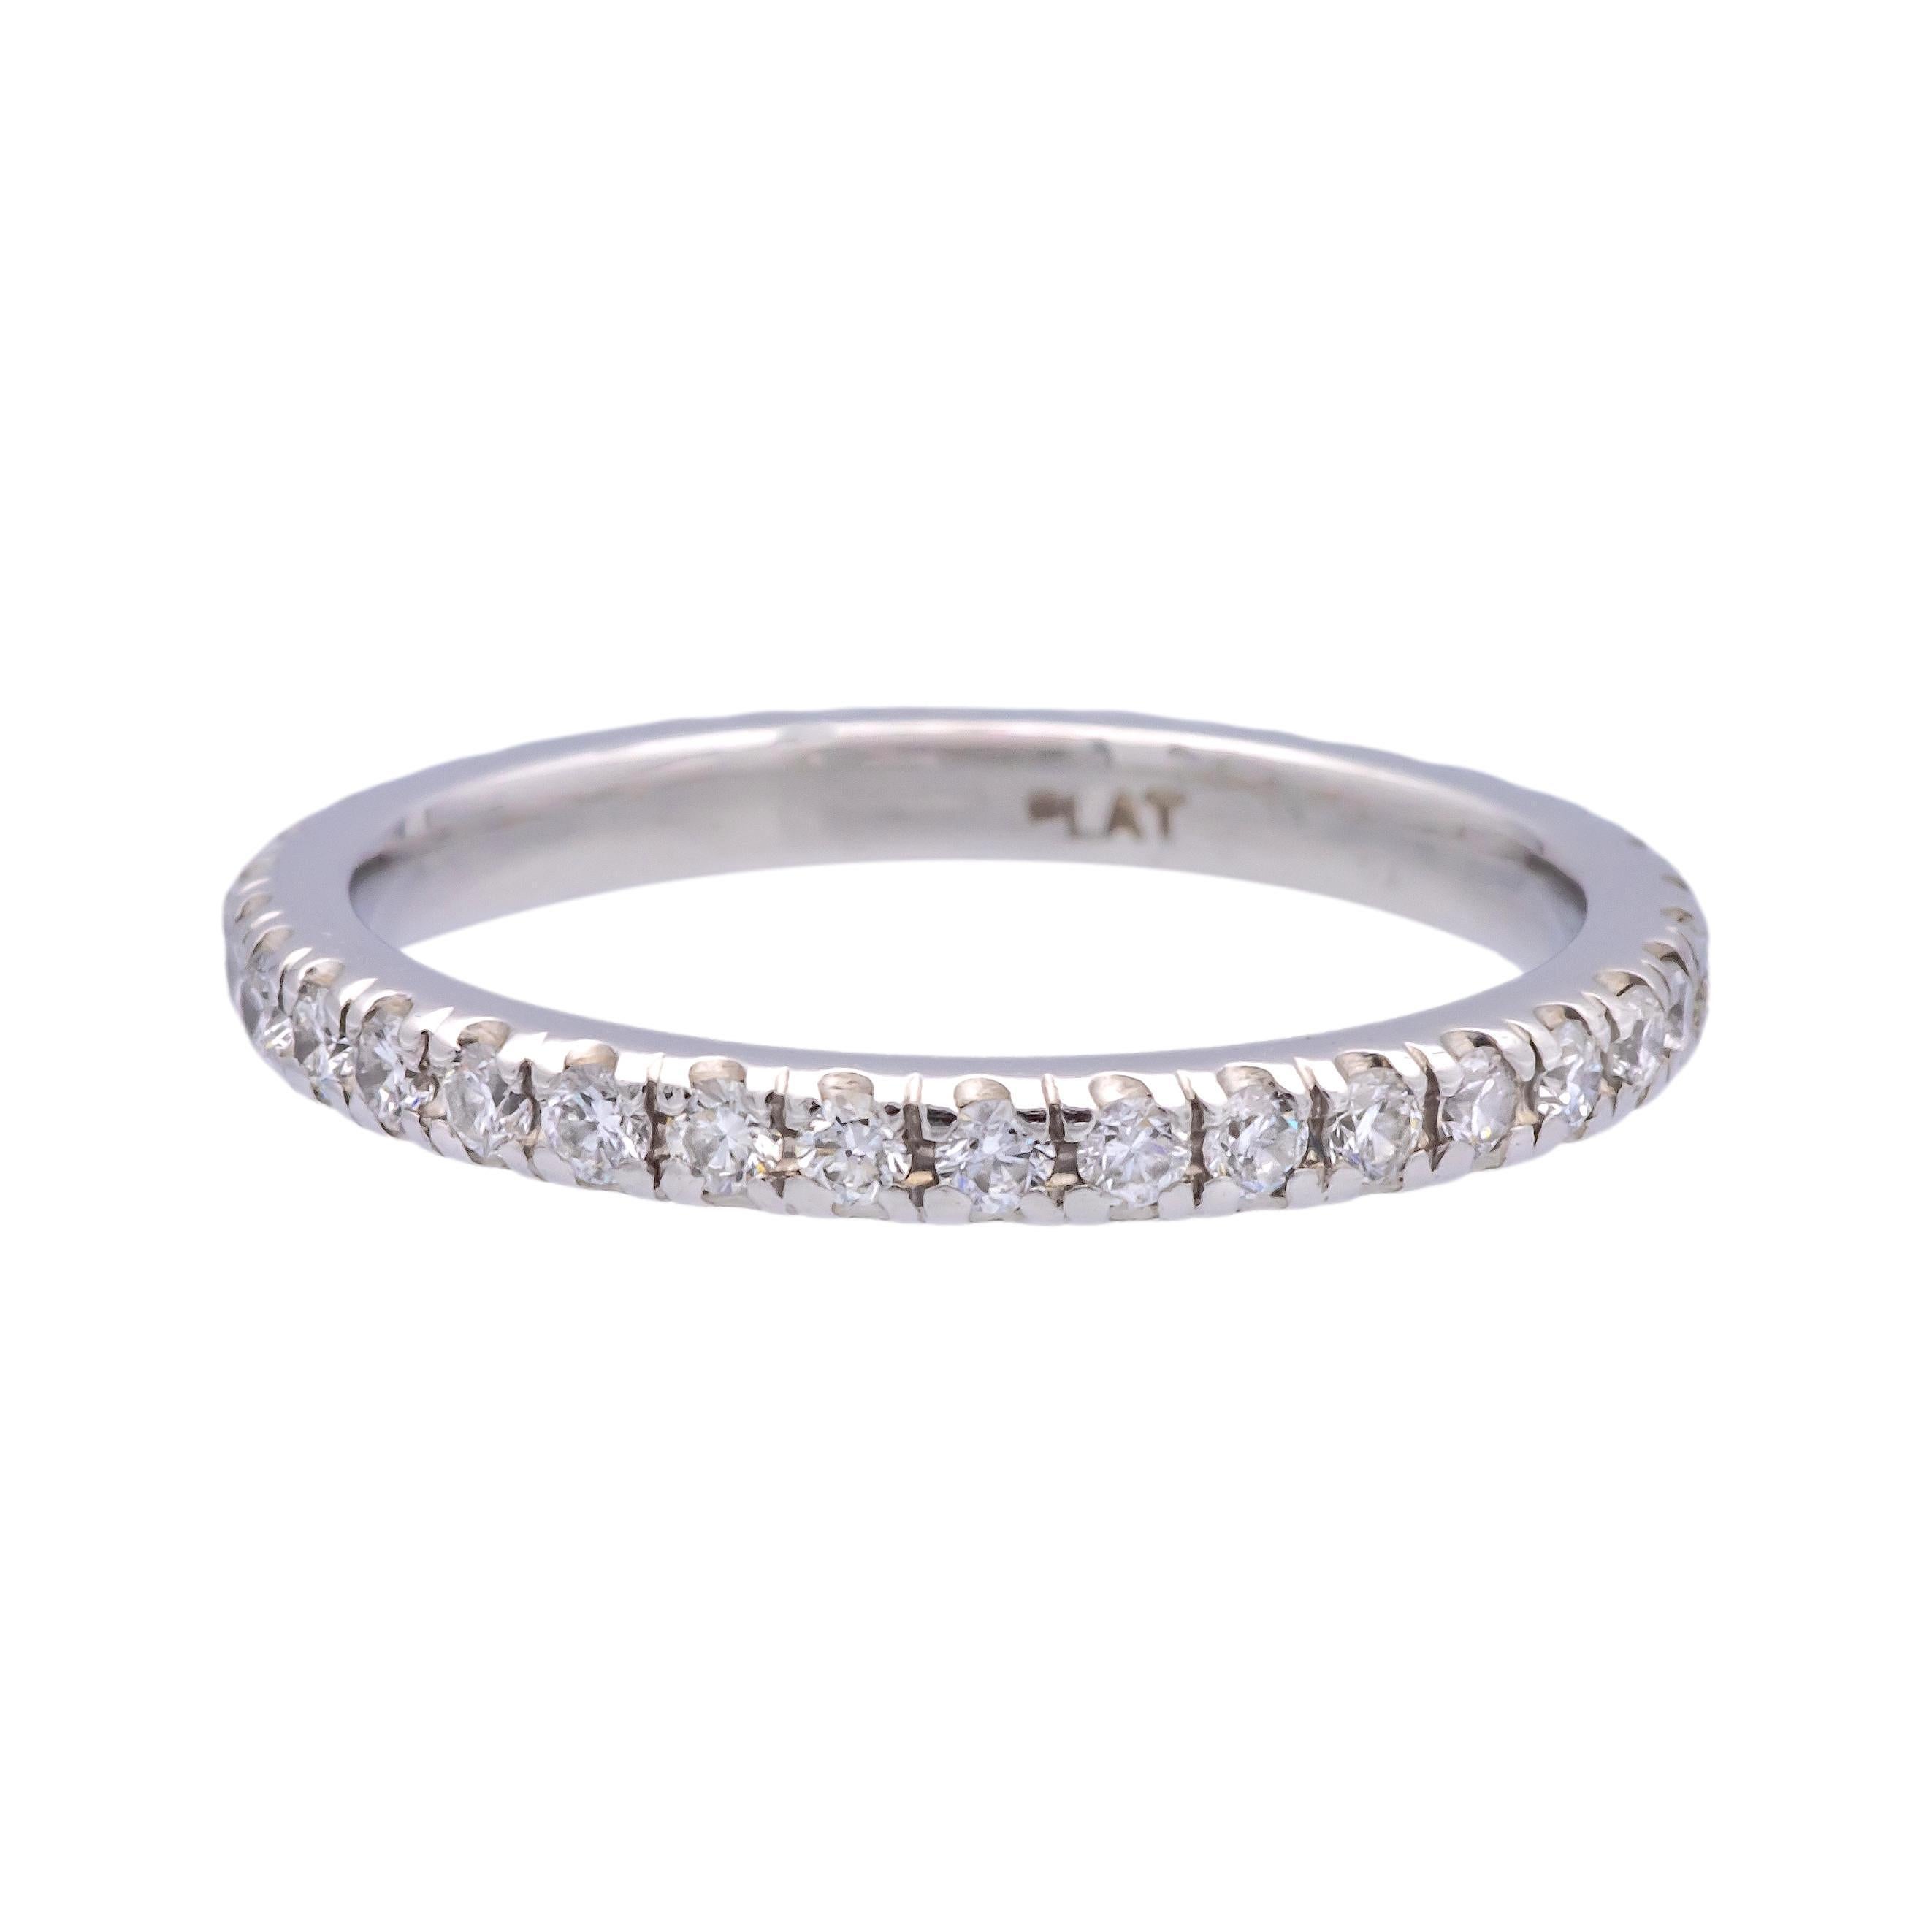 Fullternity wedding band ring finely crafted in platinum featuring 34 round brilliant cut diamonds weighing approximately 0.85 carats total weight set in 